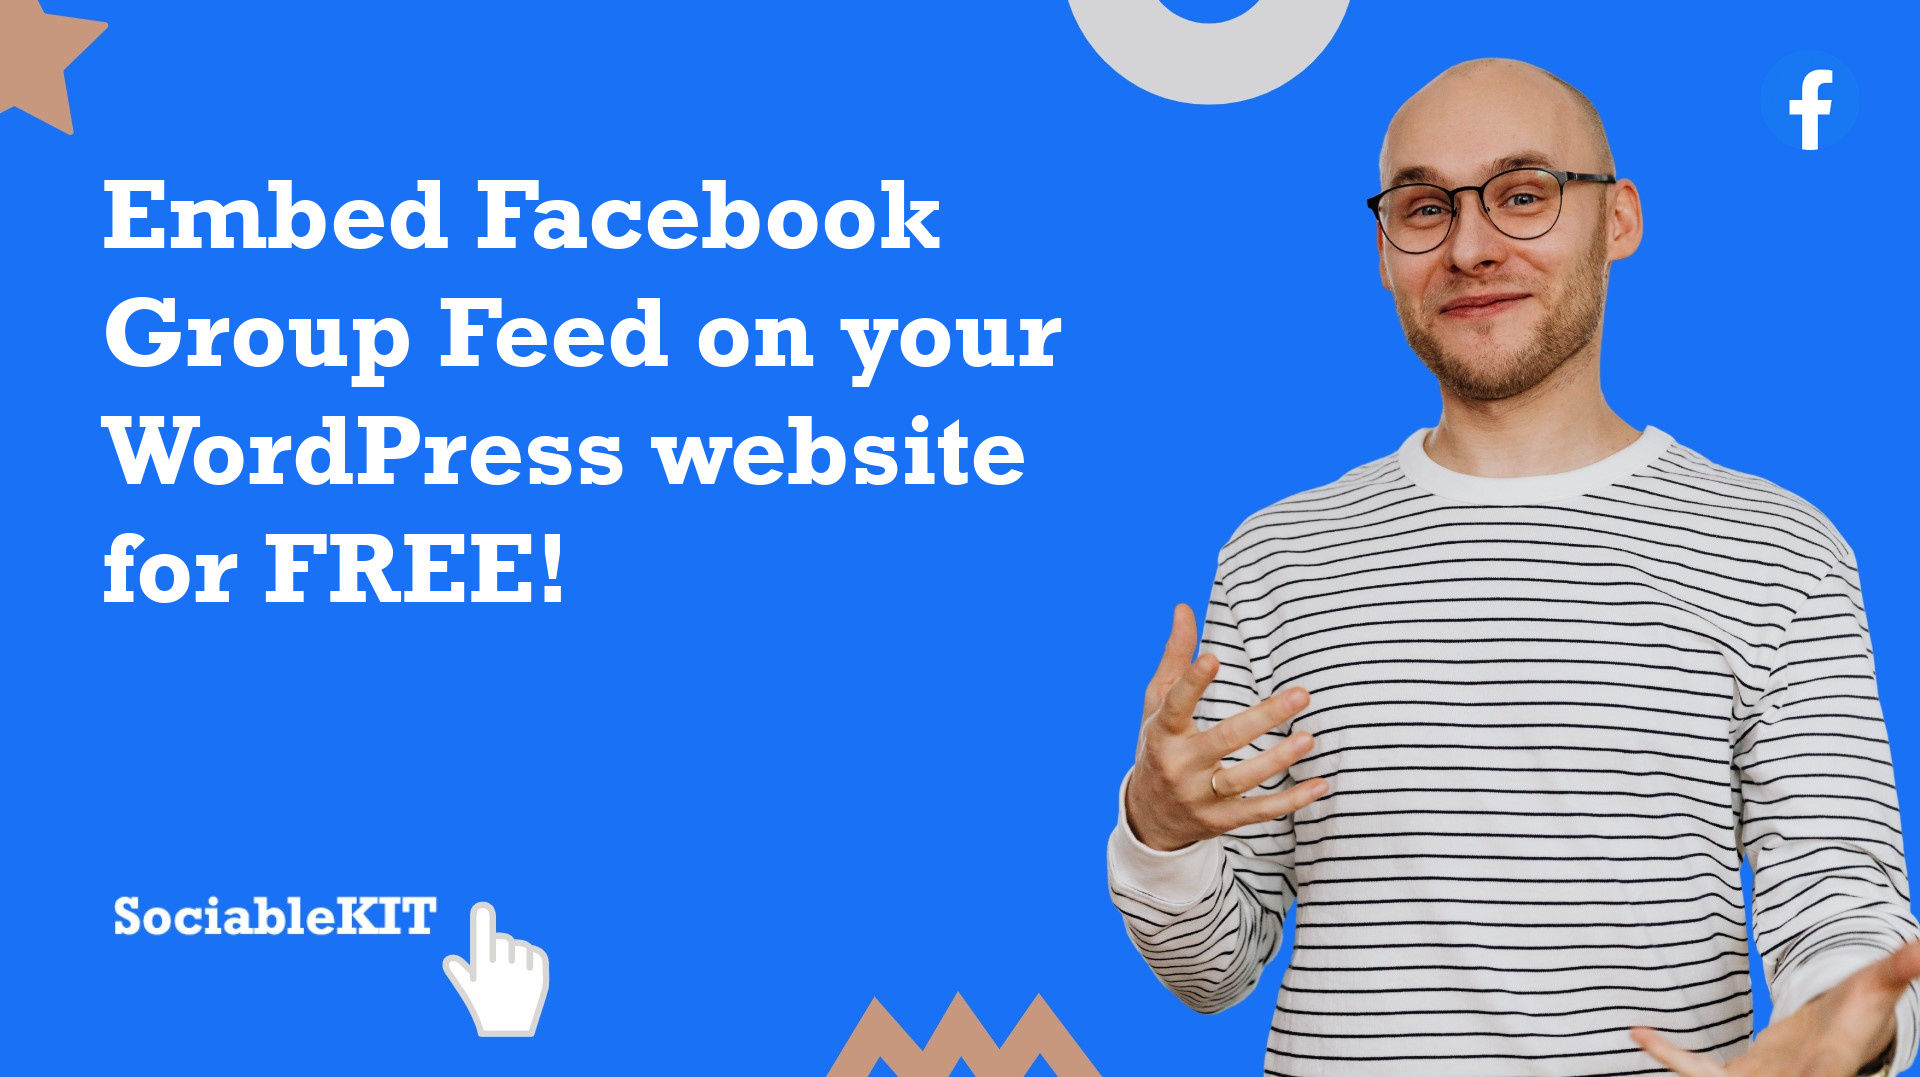 How to embed Facebook Group Feed on your WordPress website for FREE?